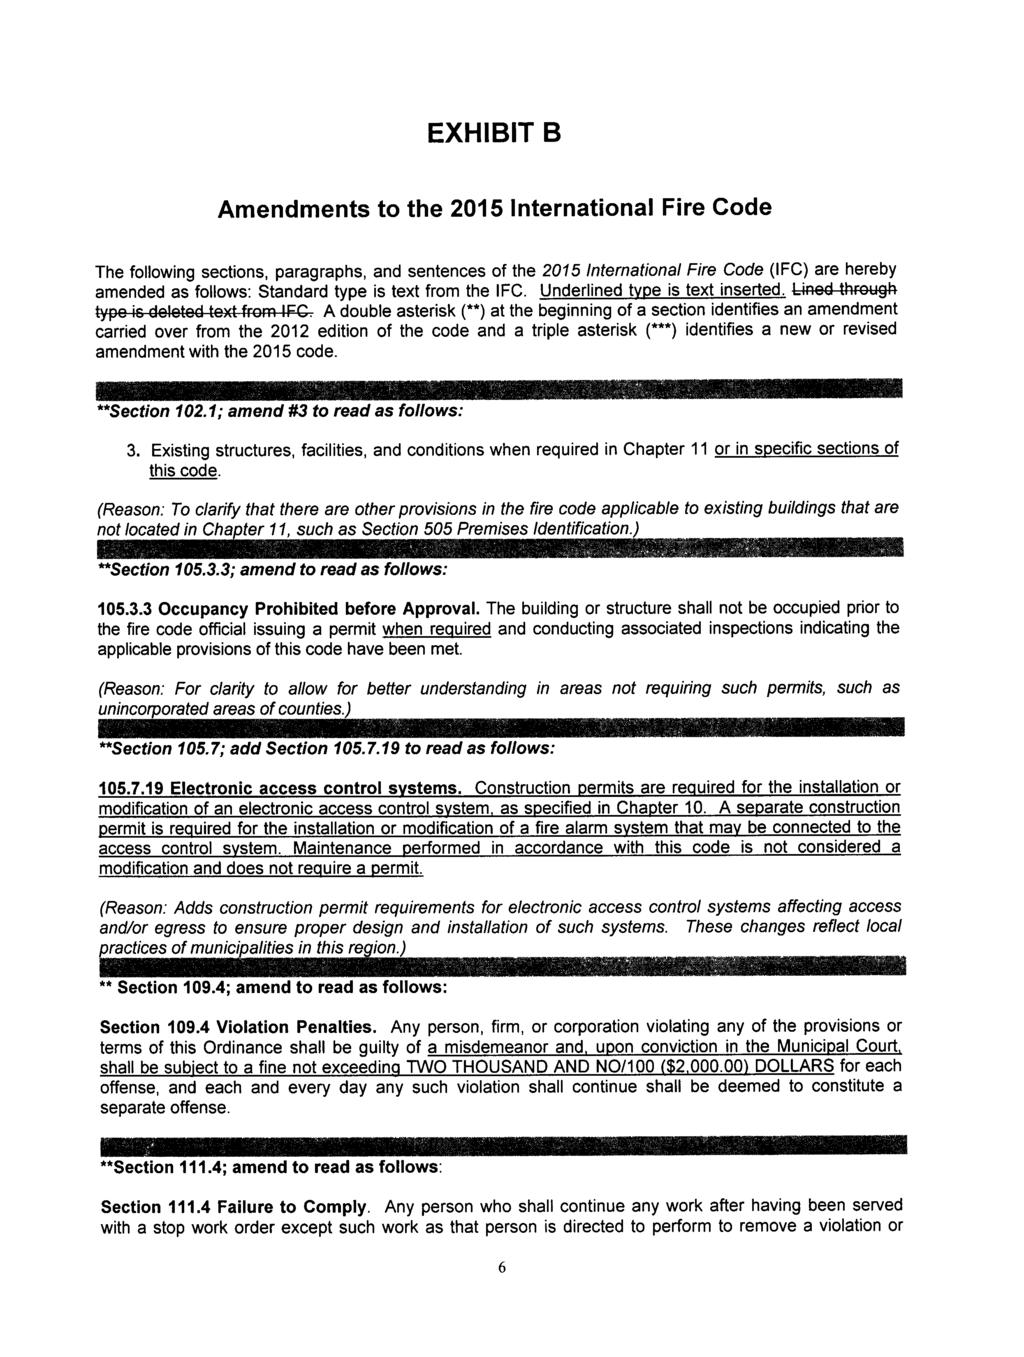 EXHIBIT B Amendments to the 2015 International Fire Code The following sections paragraphs and sentences of the 2015 International Fire Code IFC are hereby amended as follows Standard type is text